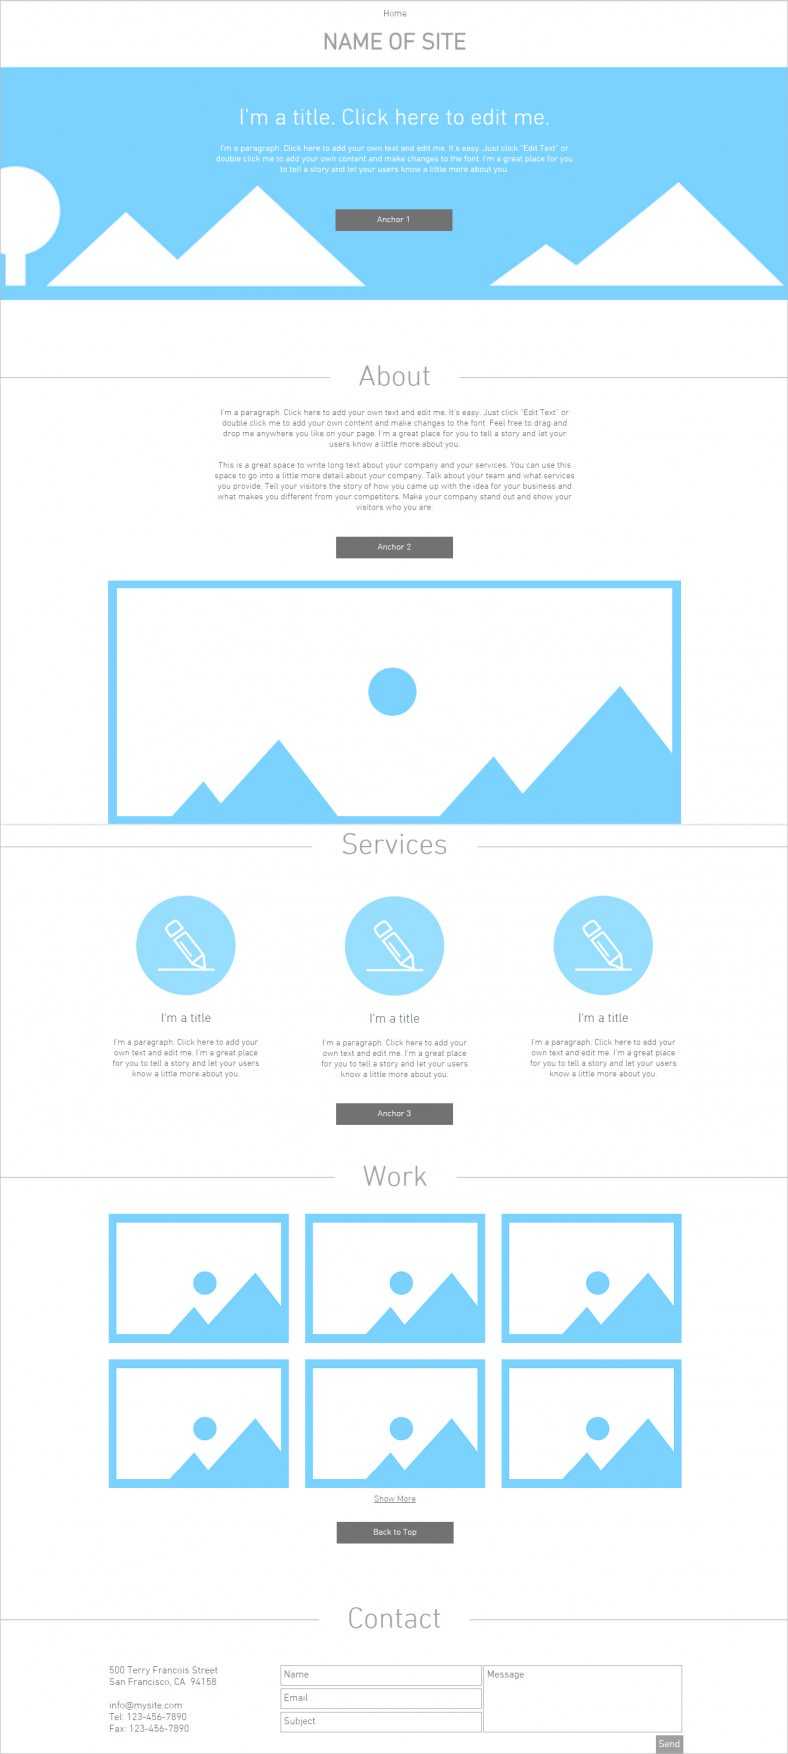 Blank Html5 Website Templates & Themes | Free & Premium With Html5 Blank Page Template